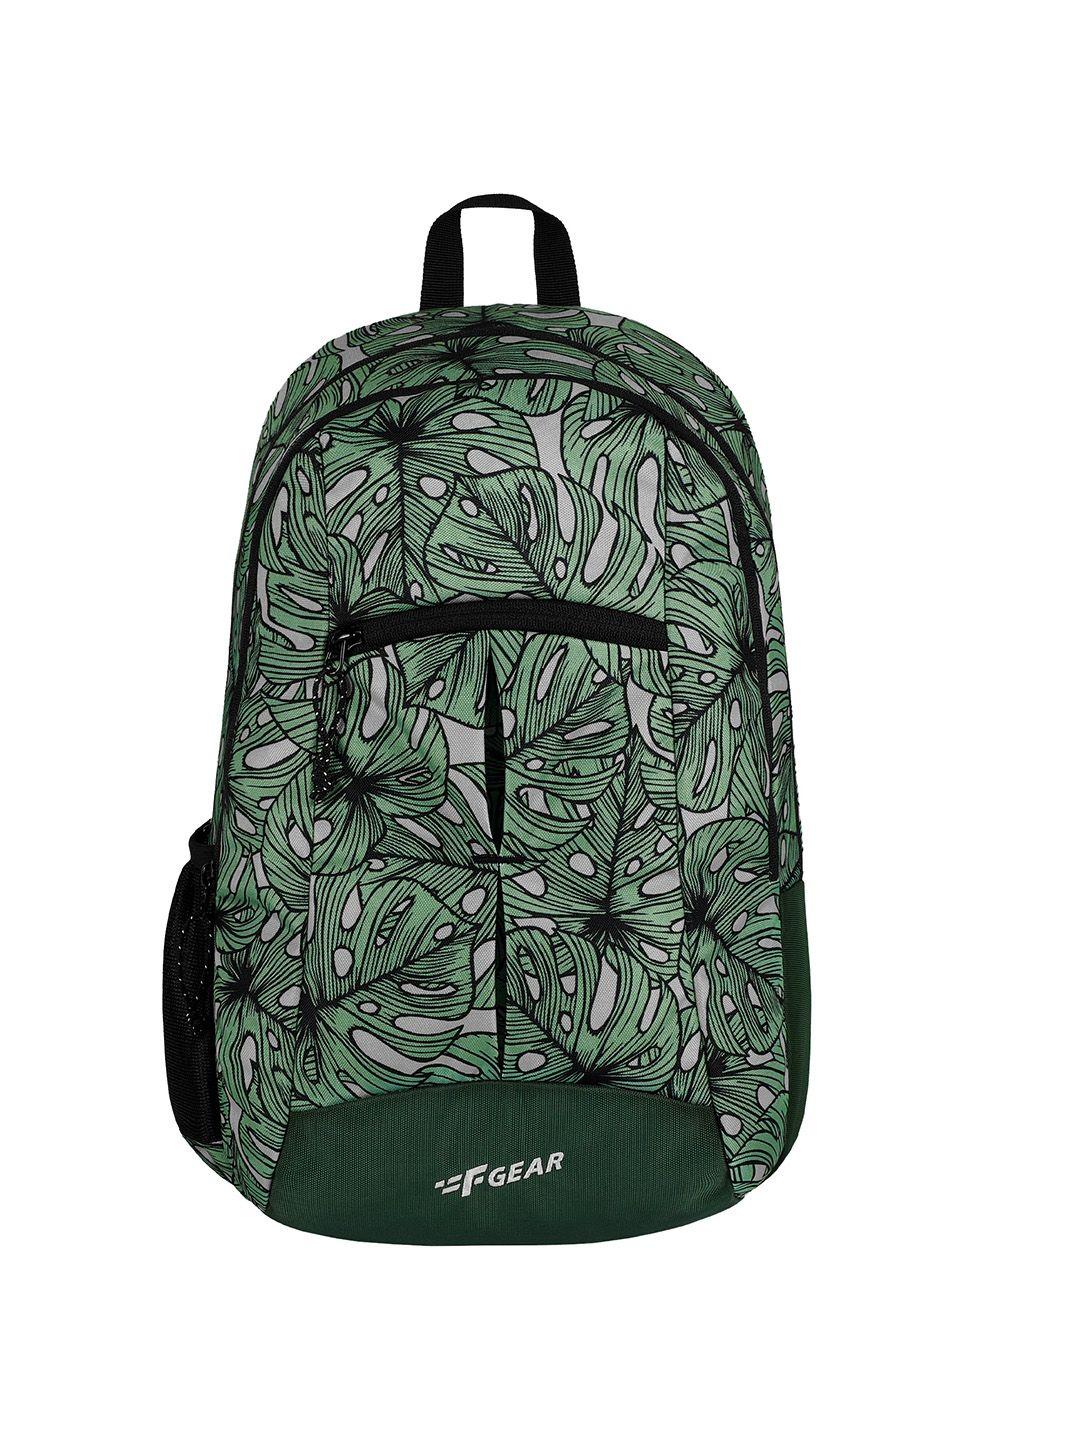 f-gear-printed-padded-backpack